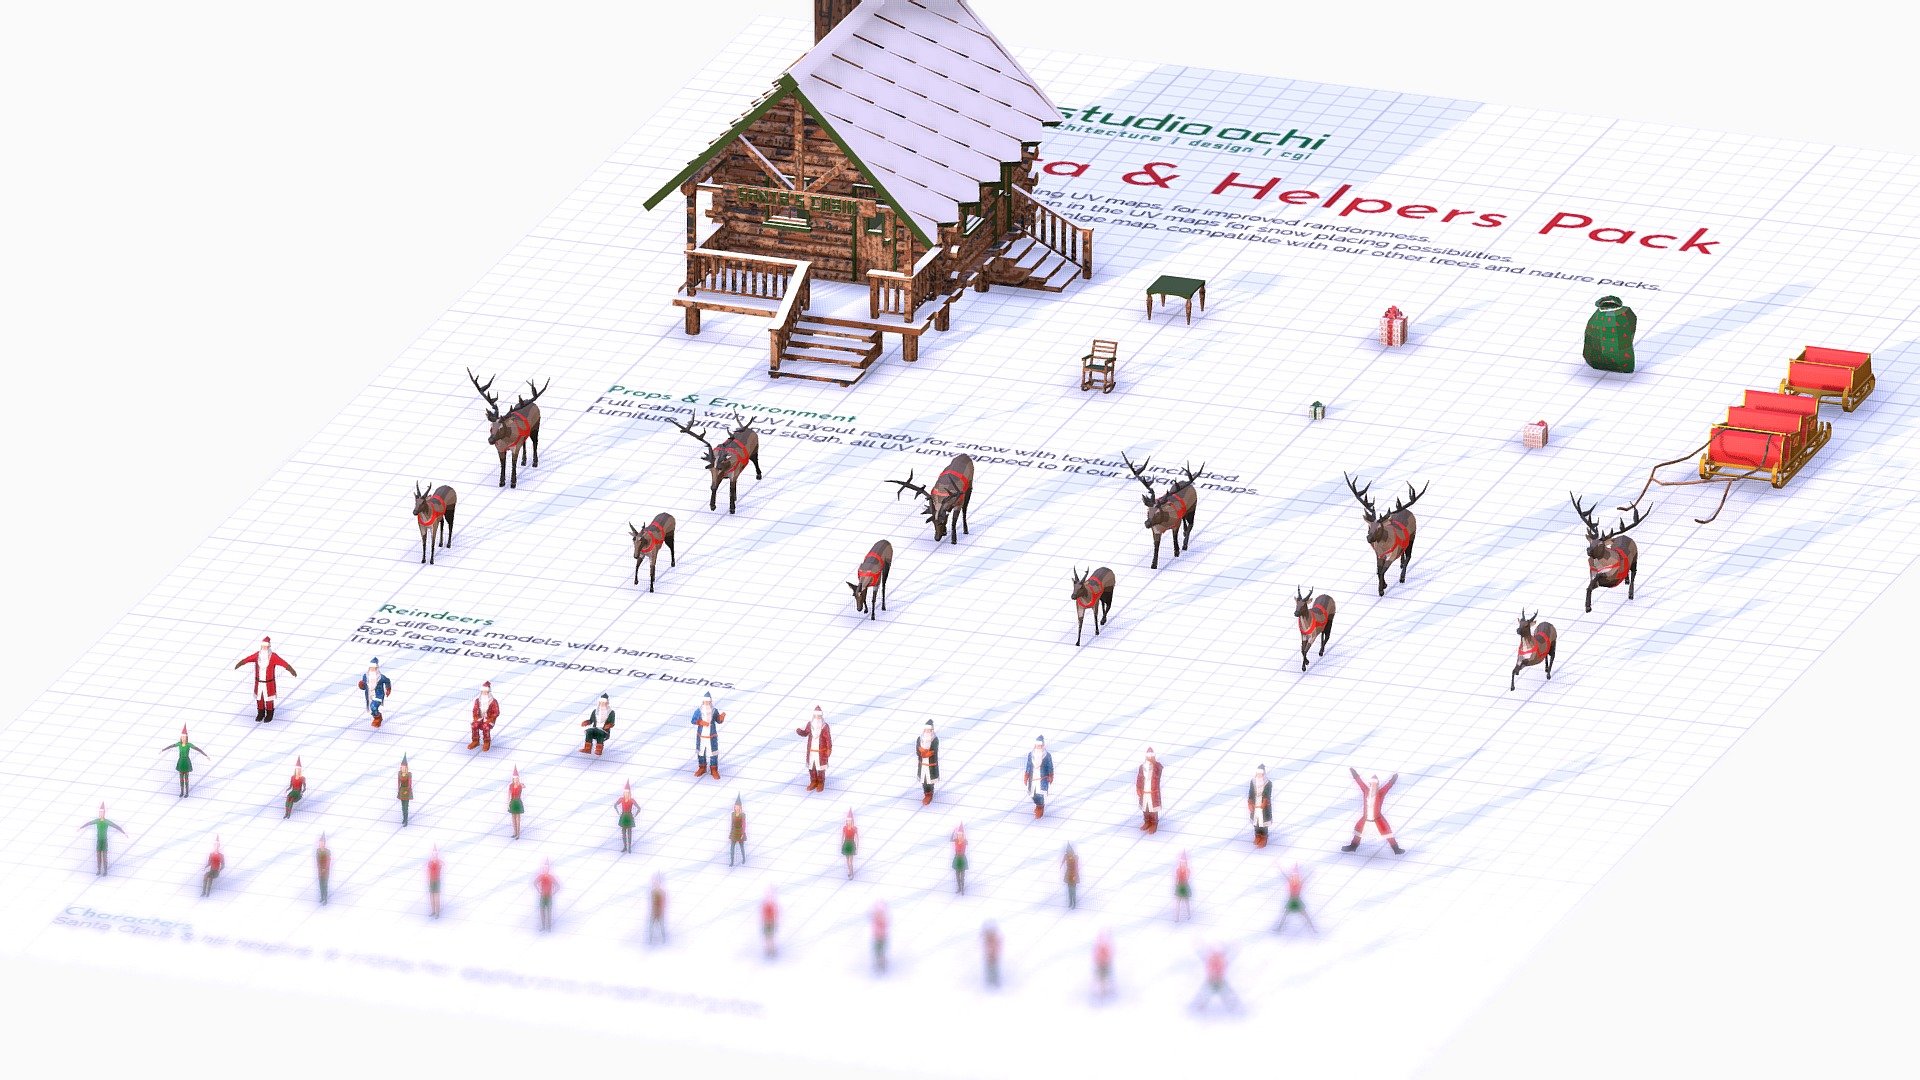 Release date December 1st!   Includes 54 objects  Lowpoly set of characters, animals and props  All files in BLEND (native), 3DS, OBJ, FBX, DAE *  A full cabin with chimeney fire pit, windows and doors as separated objects. * Rocking chair and table. * 3 gifts and gist bag. * Sleigh and towing sleigh with ropes. * Reindeers, male and female in 5 poses plus base mesh in rest pose. * Santa in T-pose plus 10 different poses- * Elfs in T-pose plus 10 different poses.   - Santa & Helpers - Buy Royalty Free 3D model by Studio Ochi (@studioochi) 3d model